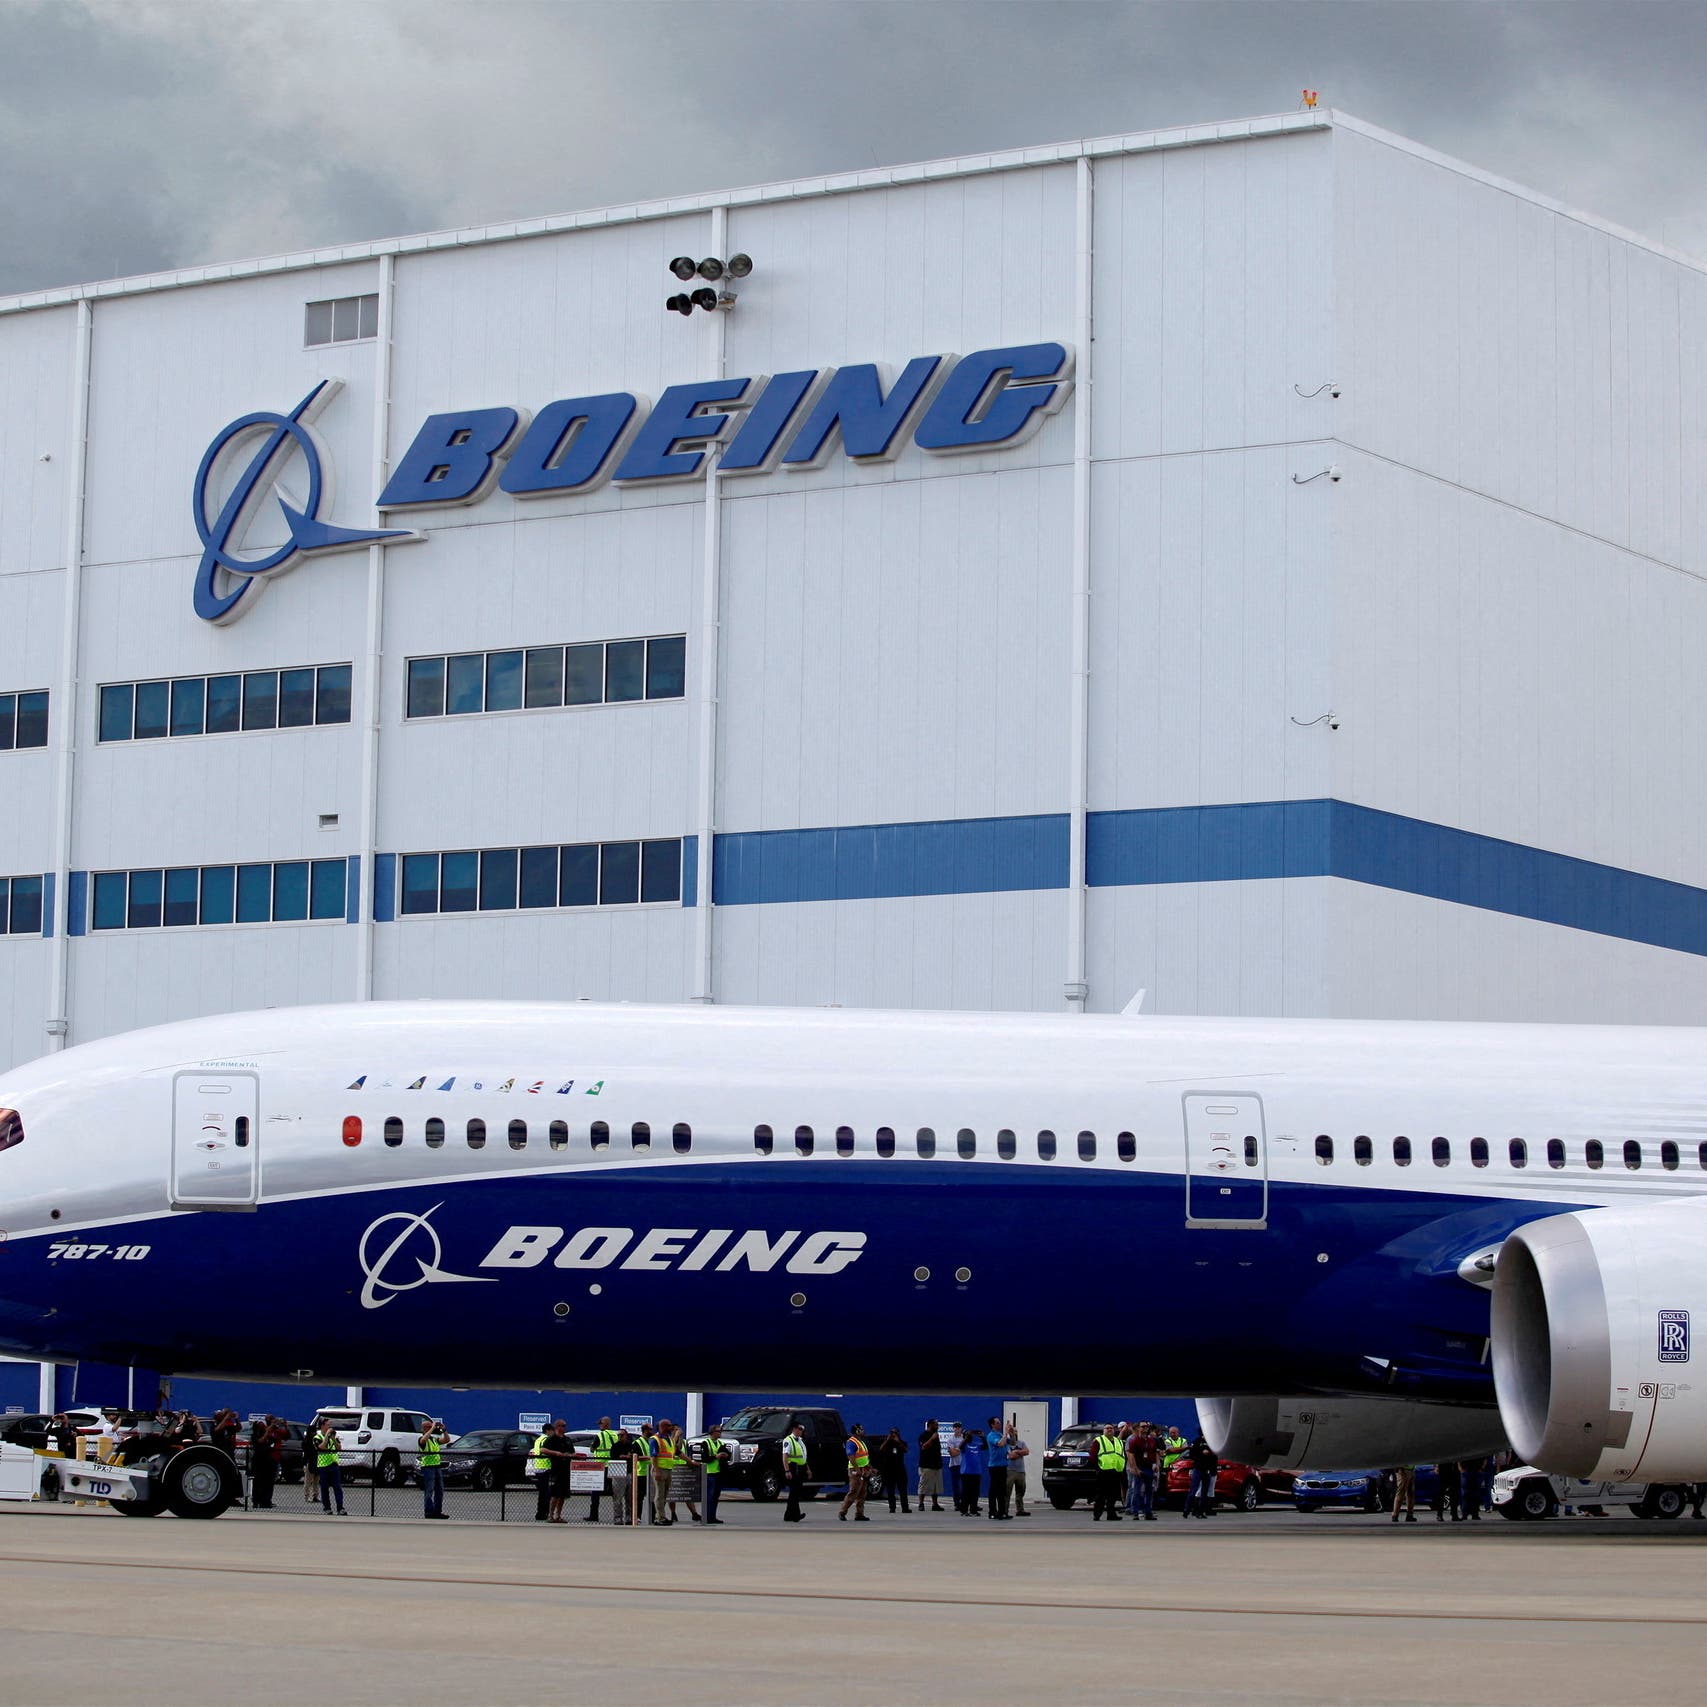 New 5G launch to affect Boeing 787 landings, warns US aviation authority